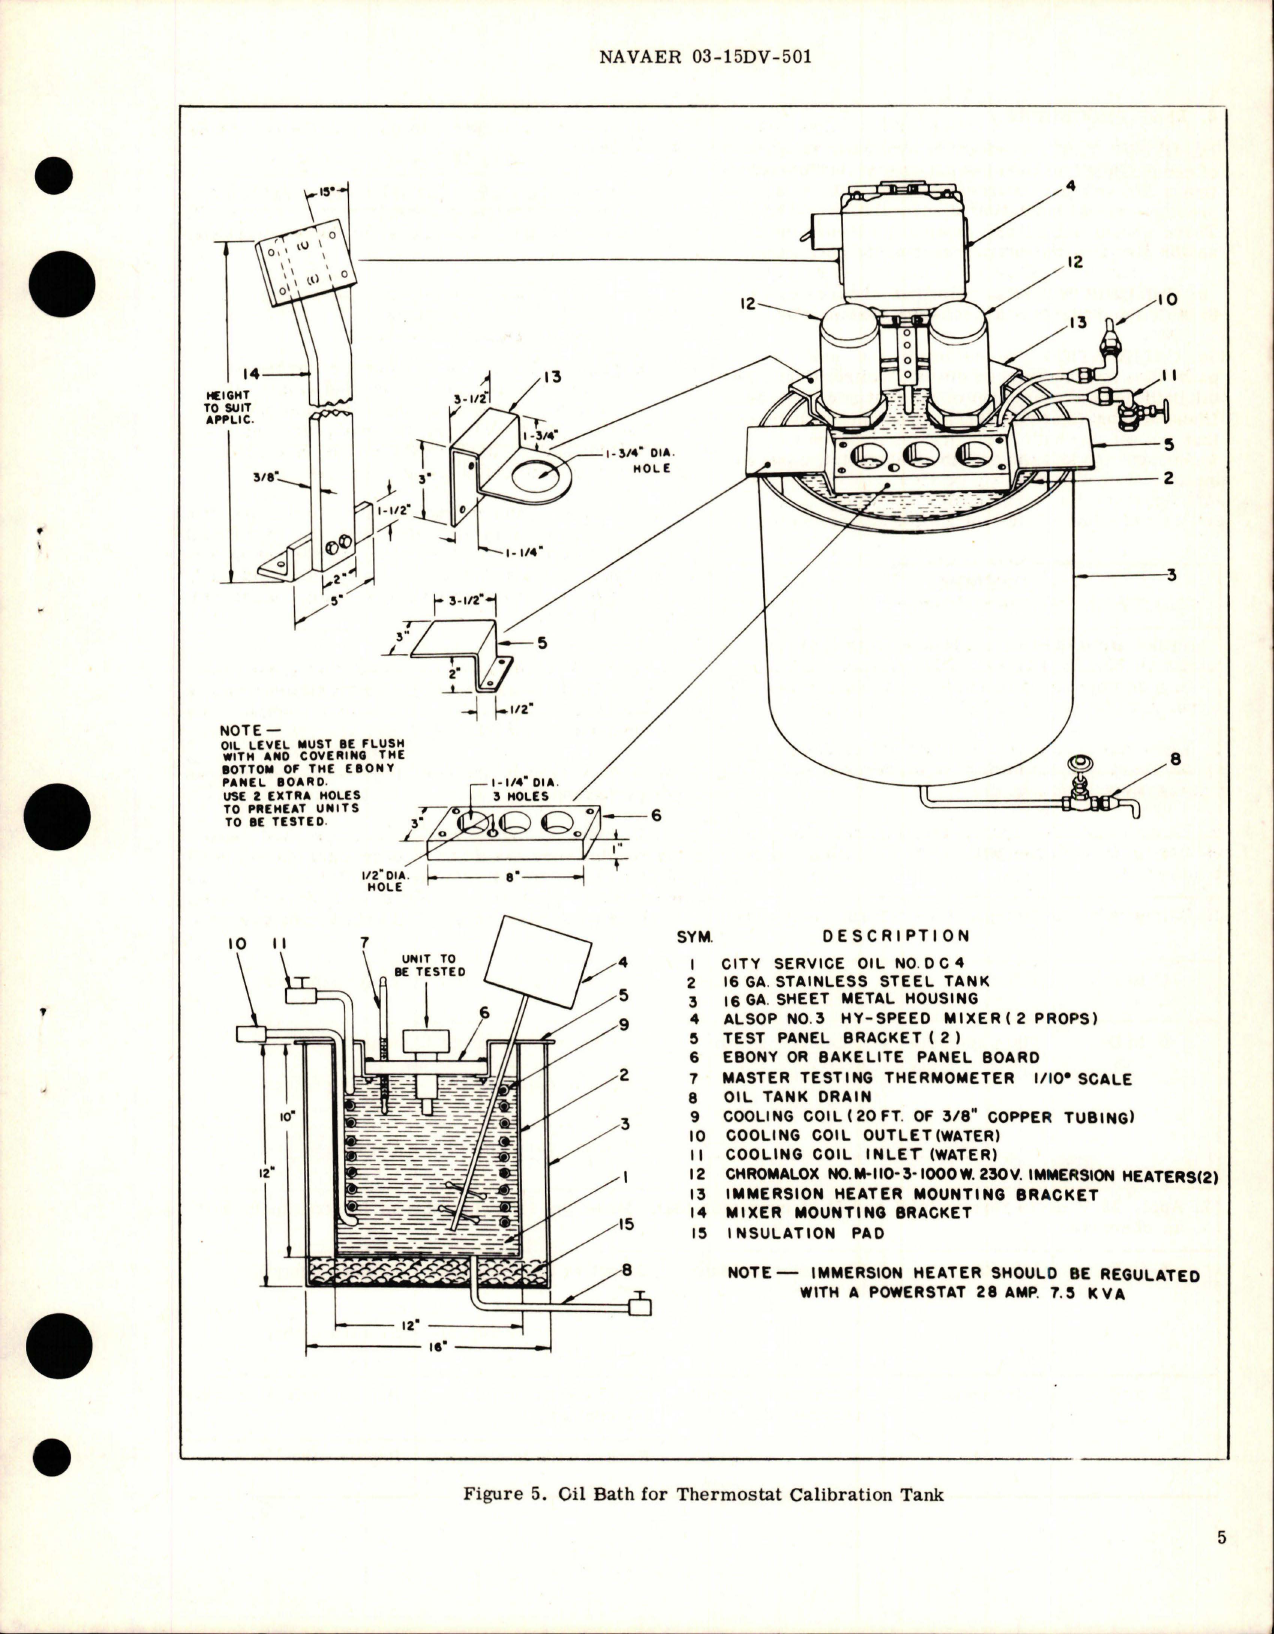 Sample page 5 from AirCorps Library document: Overhaul Instructions with Parts for Aircraft Oil Temperature Control Thermostat - 53C158-1